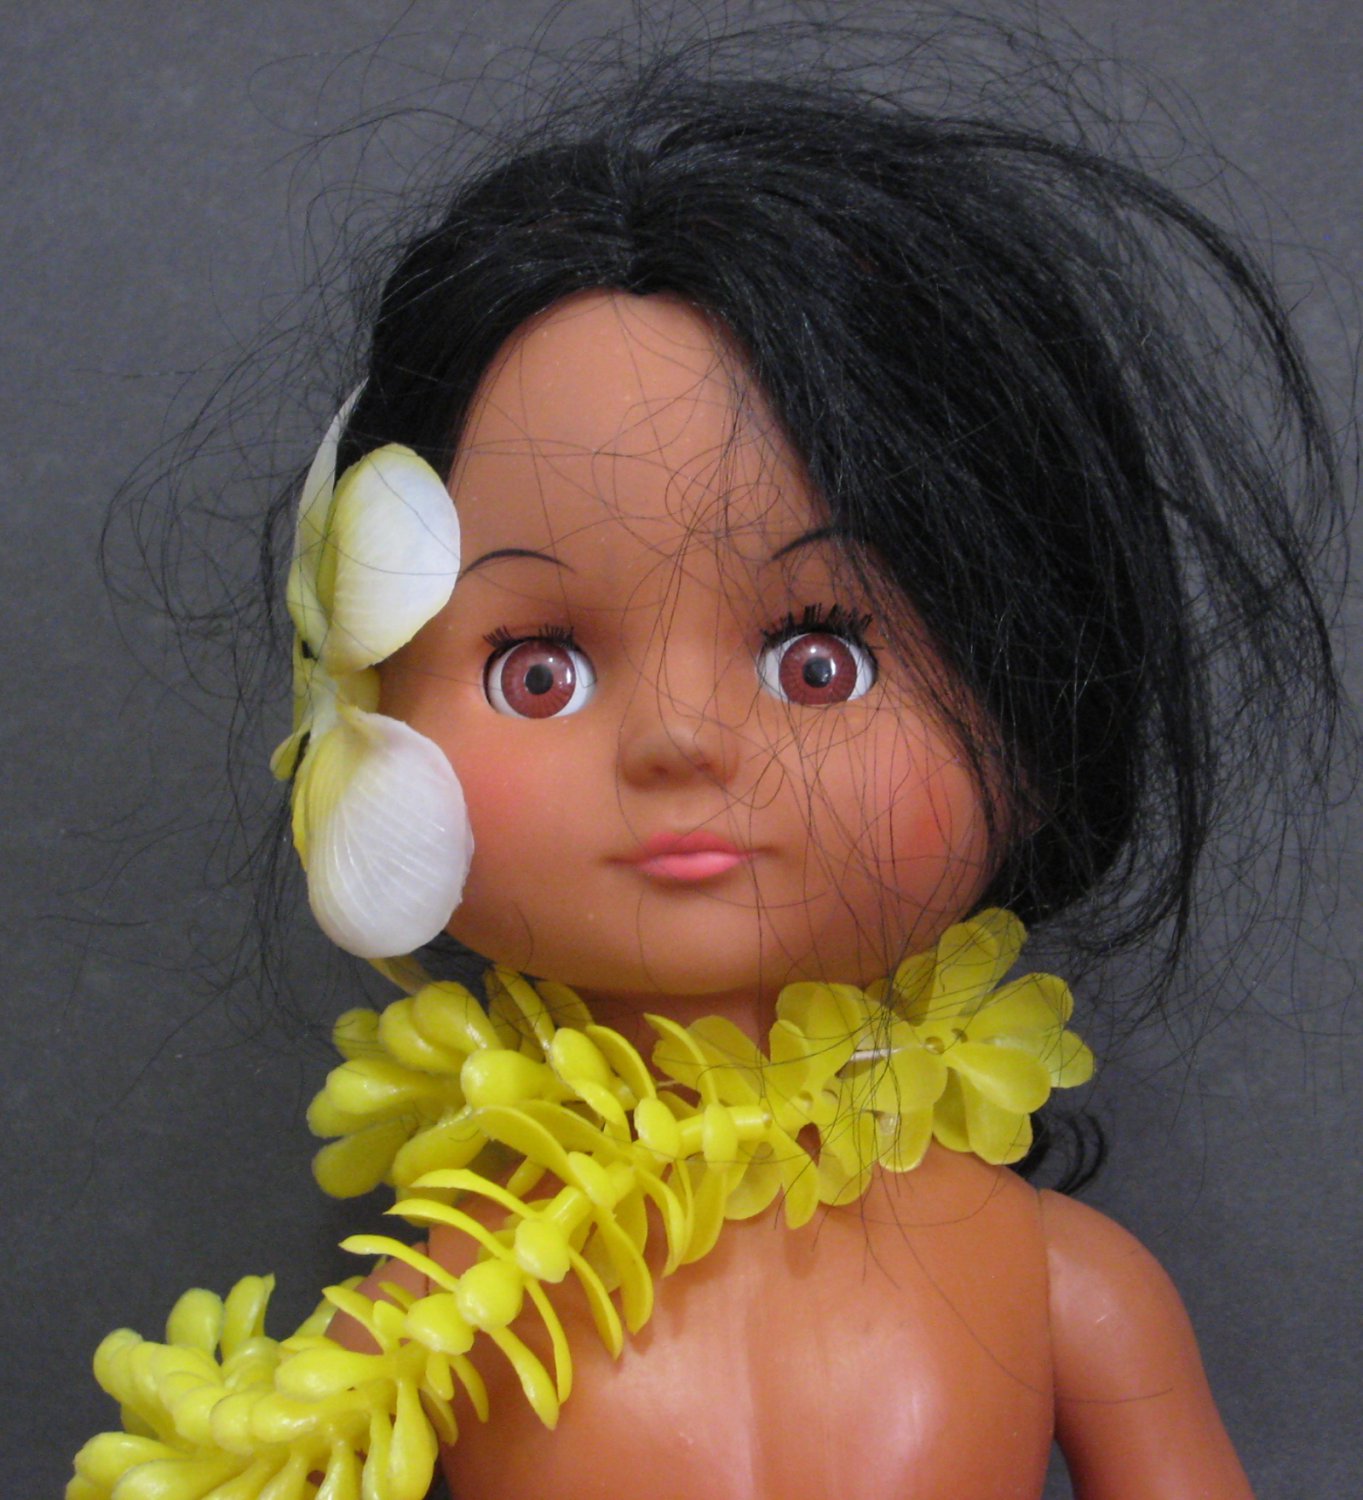 Hawaiian Blow Molded Plastic 15" Hula Doll with Grass Skirt and Lei - 1960s or 1970s Vintage